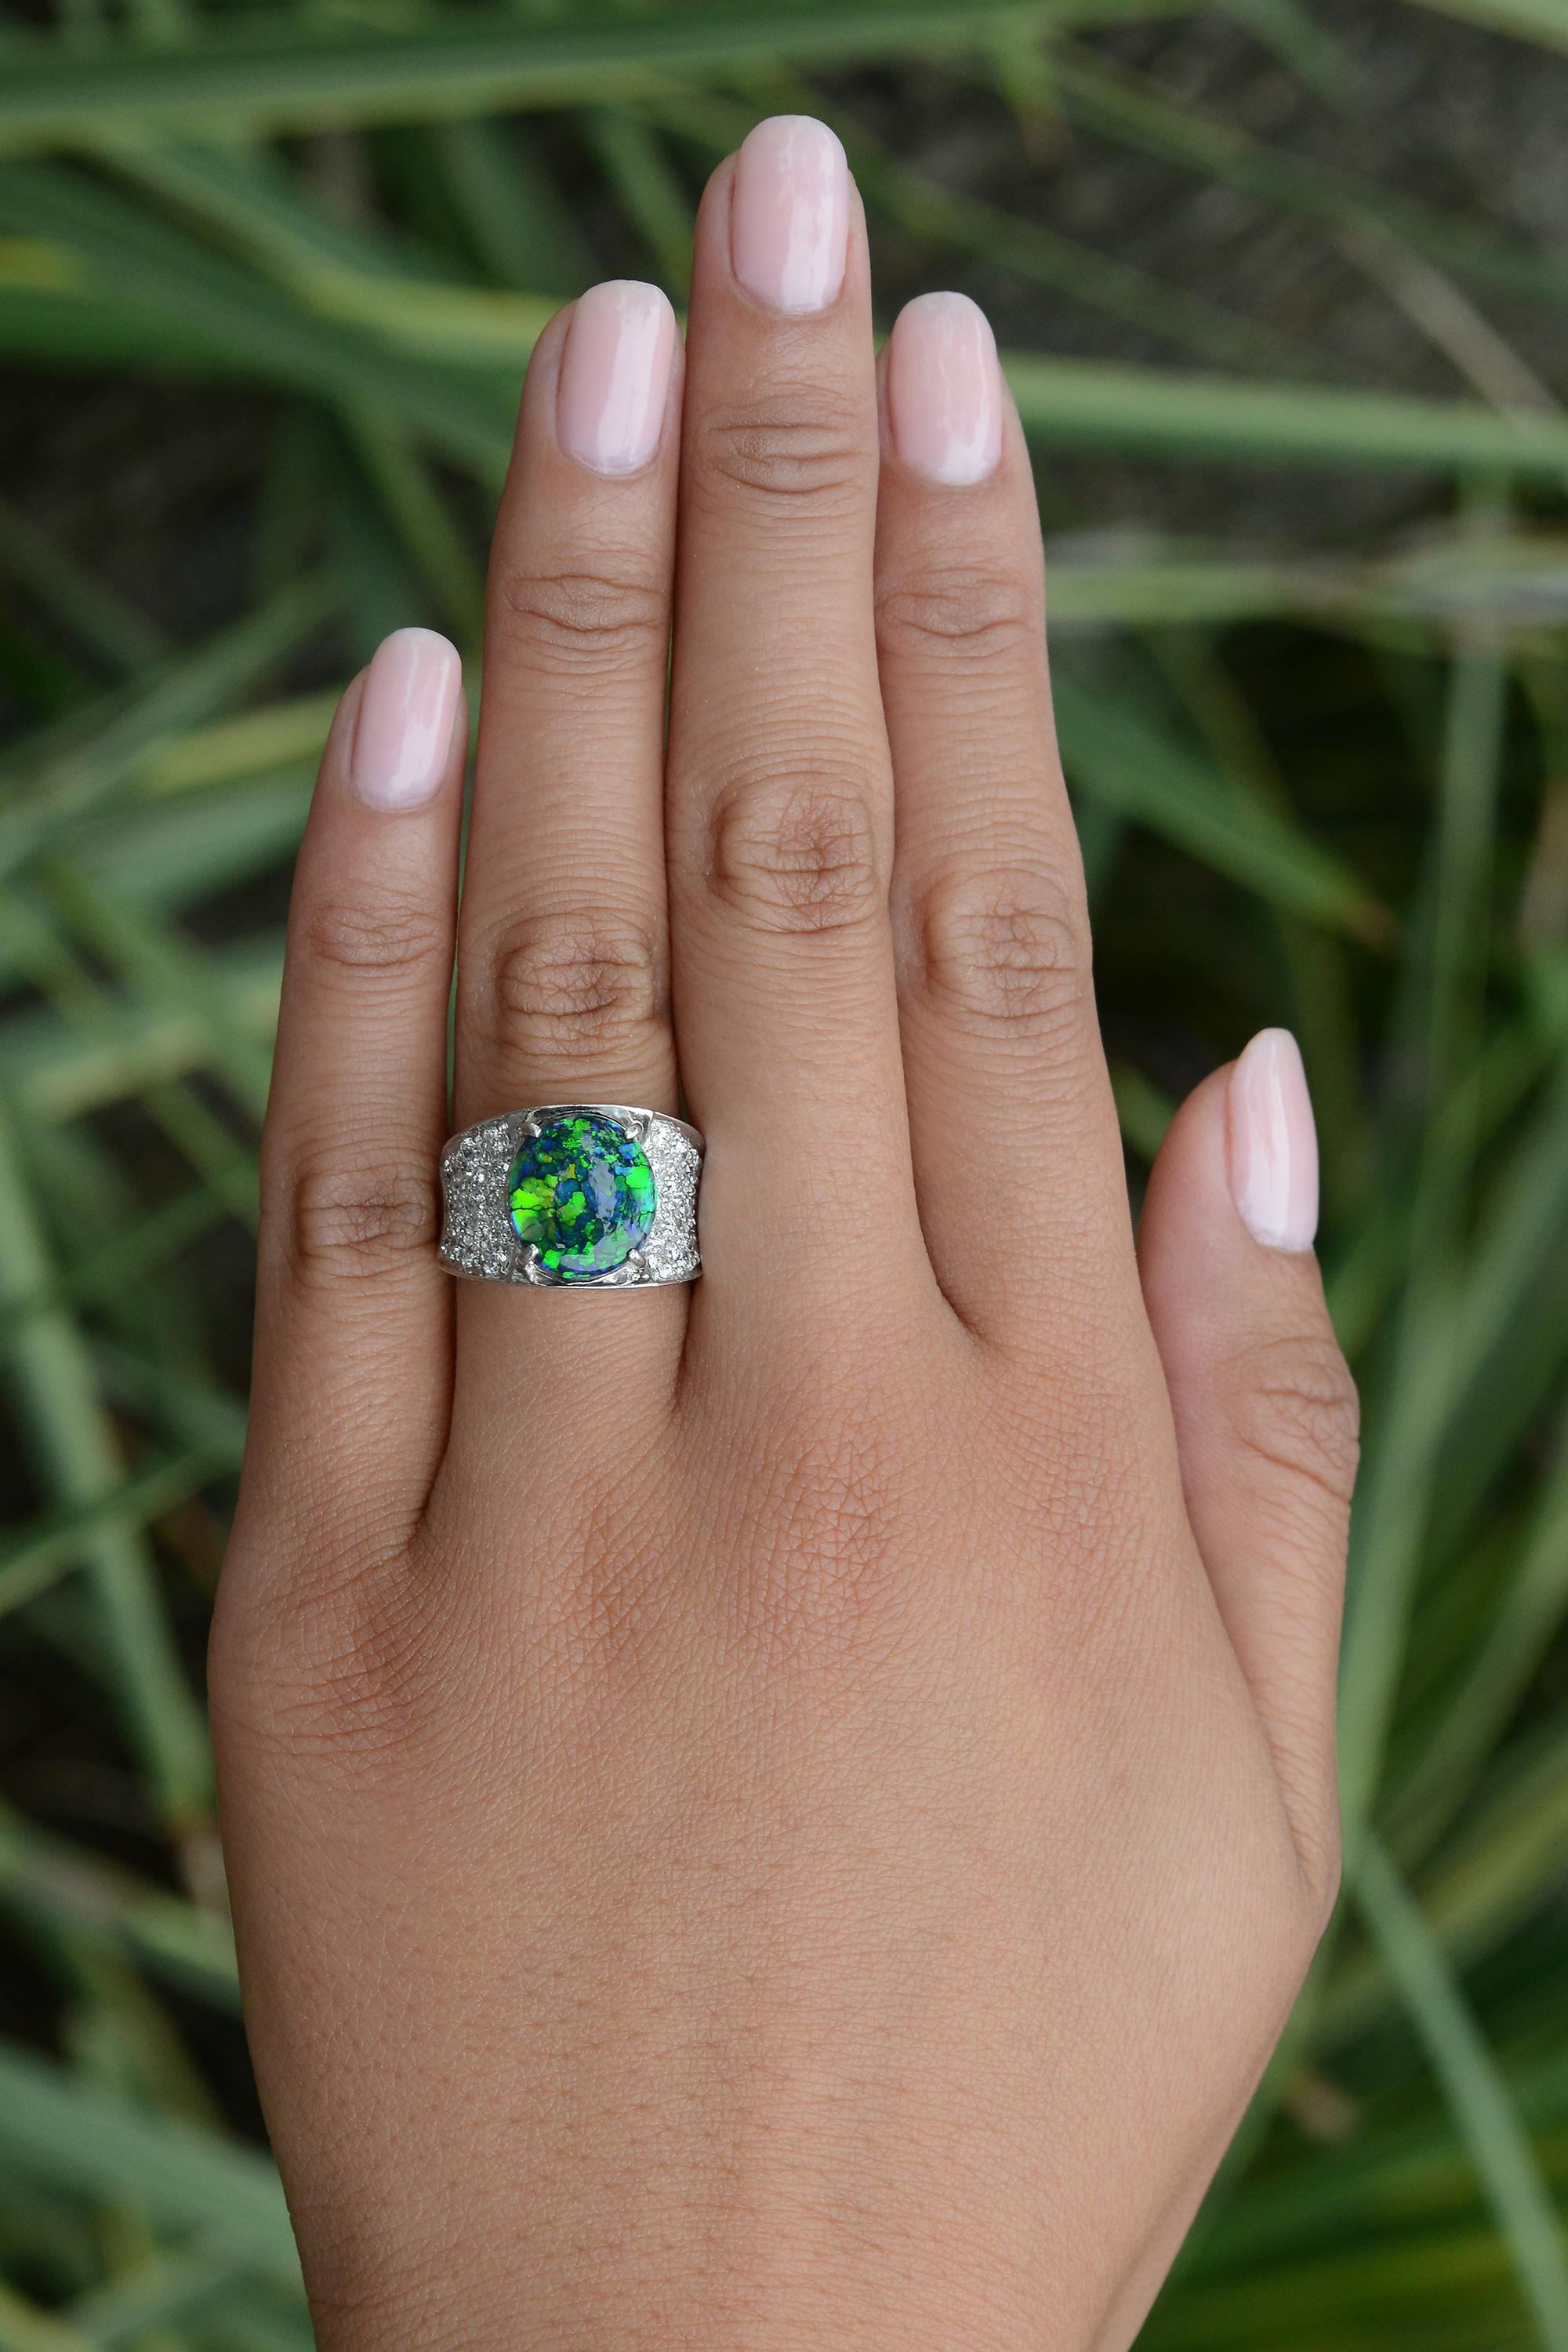 This extraordinary cocktail ring features a phenomenal 3.48 carat Australian black opal with a harlequin pattern. The fantastic gemstone from the renowned Lightning Ridge mine showcases prominent bright green, blue and secondary yellow flashes. The